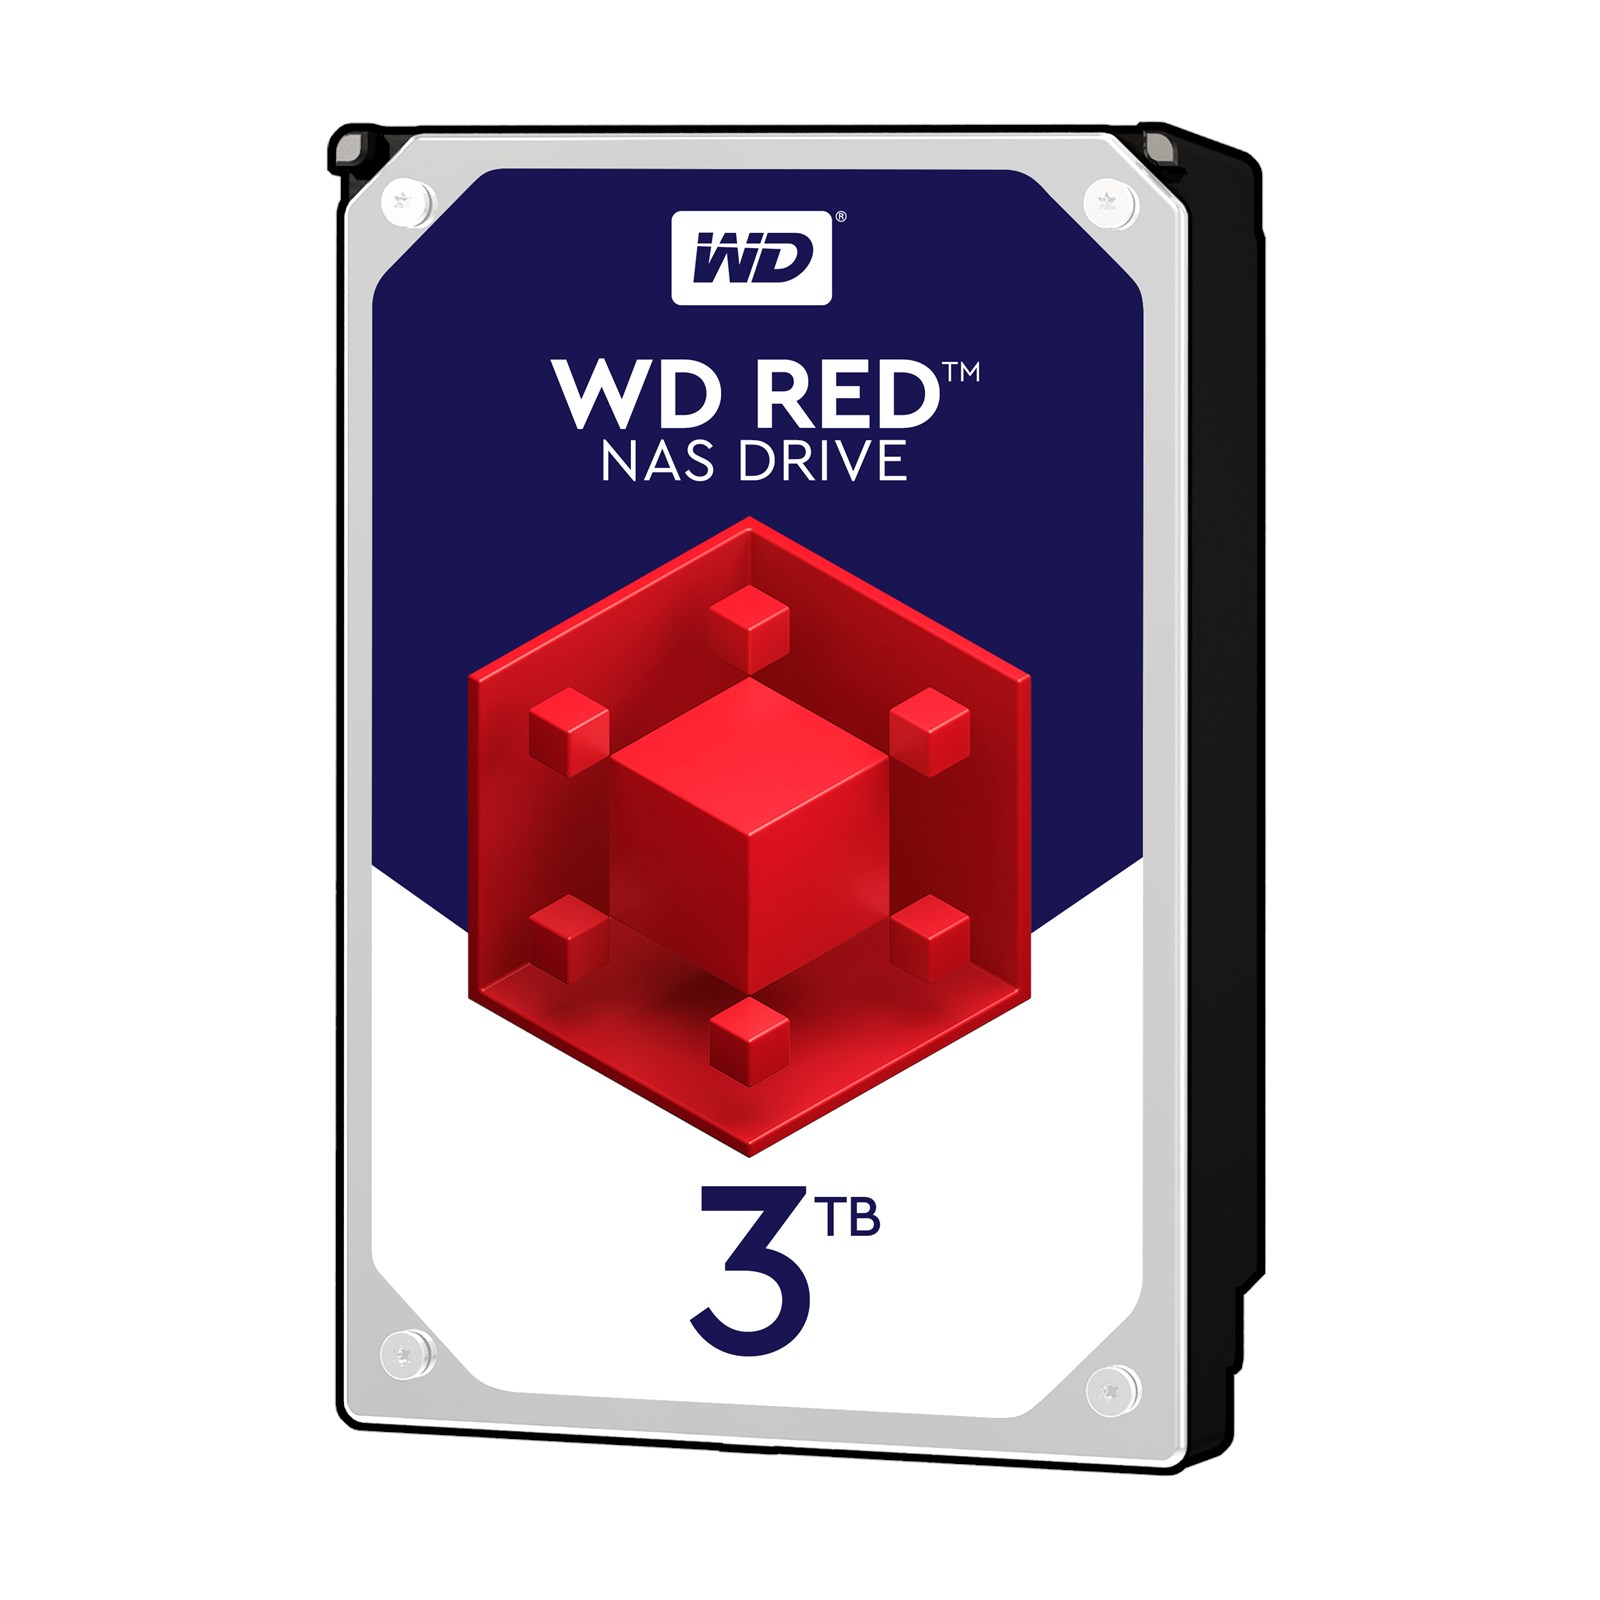 WD RED 3TB 5400RPM 64MB SATA3 6Gbit/sn WD30EFRX NAS HDD